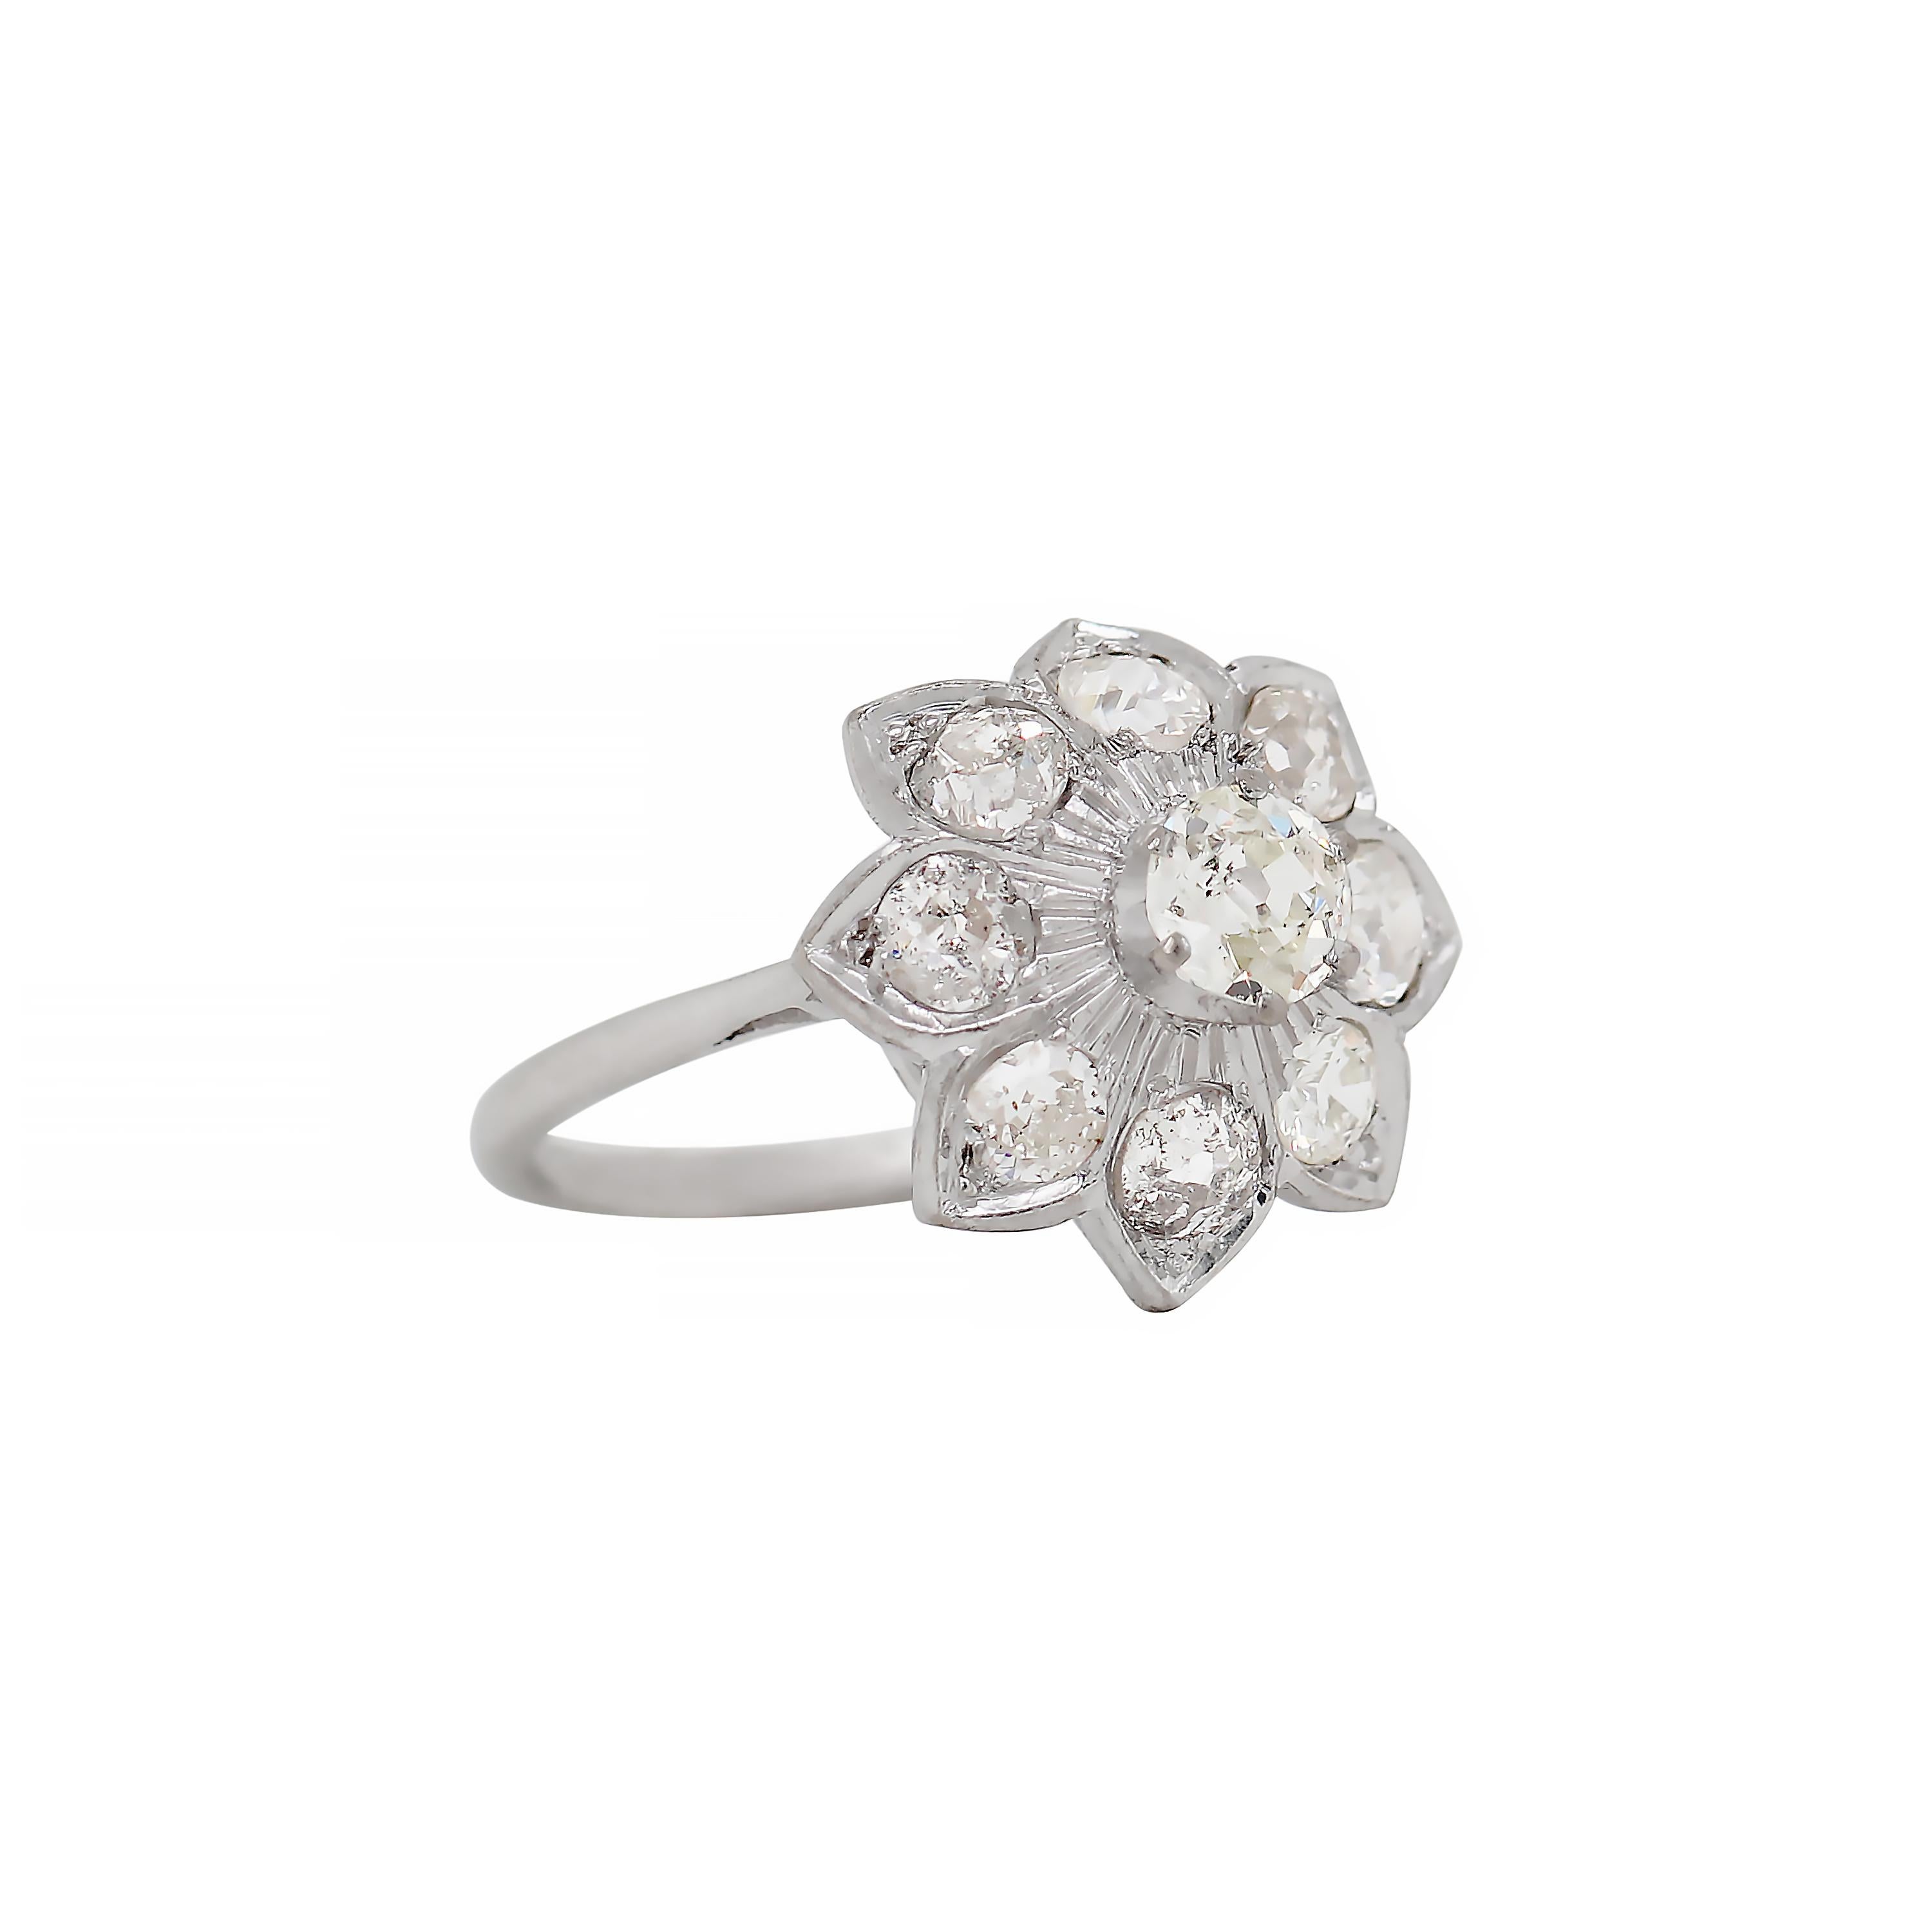 This one of a kind antique flower dress ring features a Victorian old cut diamond in the centre weighing approximately 0.30ct in a six claw open back setting. Surrounded are eight petals, each set with a Victorian old cut diamond all weighing an